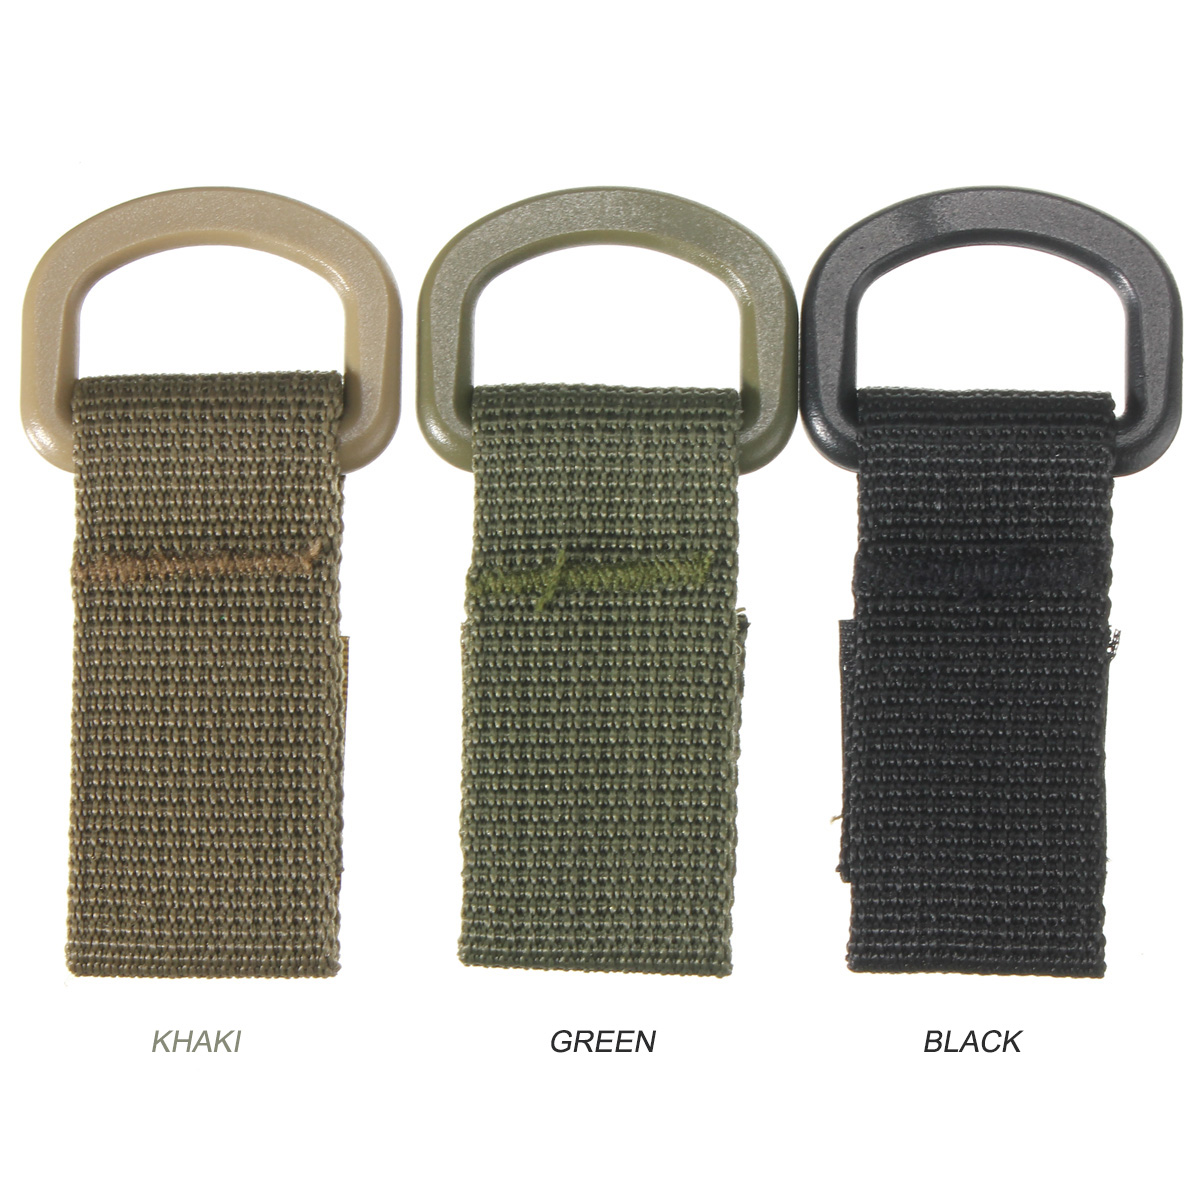 Military-Tactical-Carabiner-Nylon-Strap-Buckle-Hook-Belt-Hanging-Keychain-D-shaped-Ring-Molle-System-1028668-1